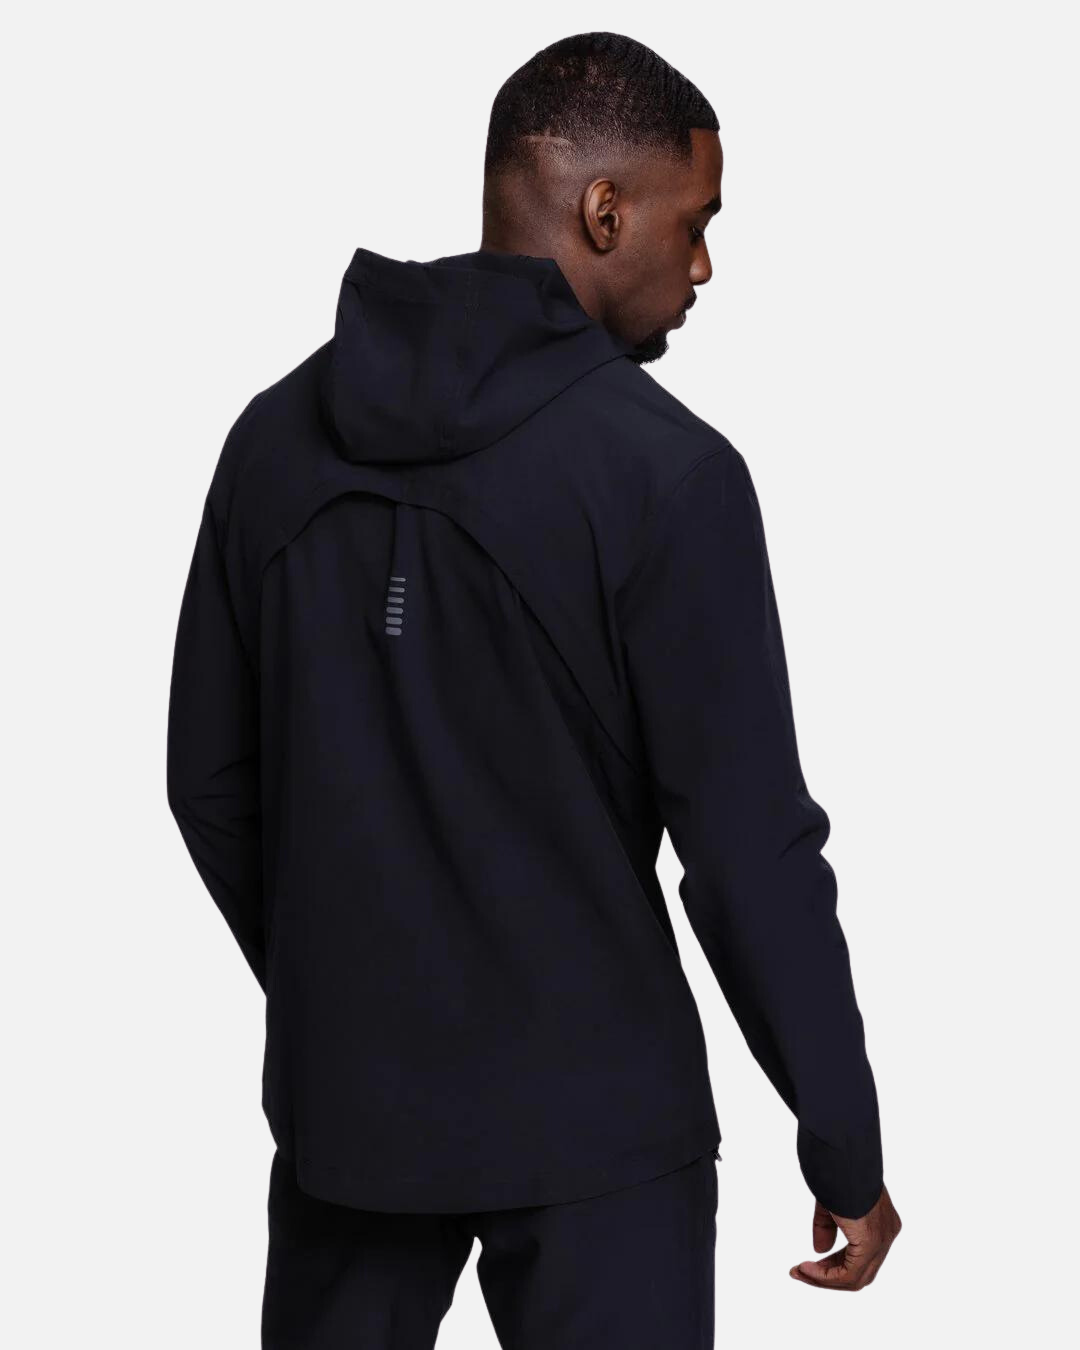 Under Armor Outrun The Storm Track Jacket - Black